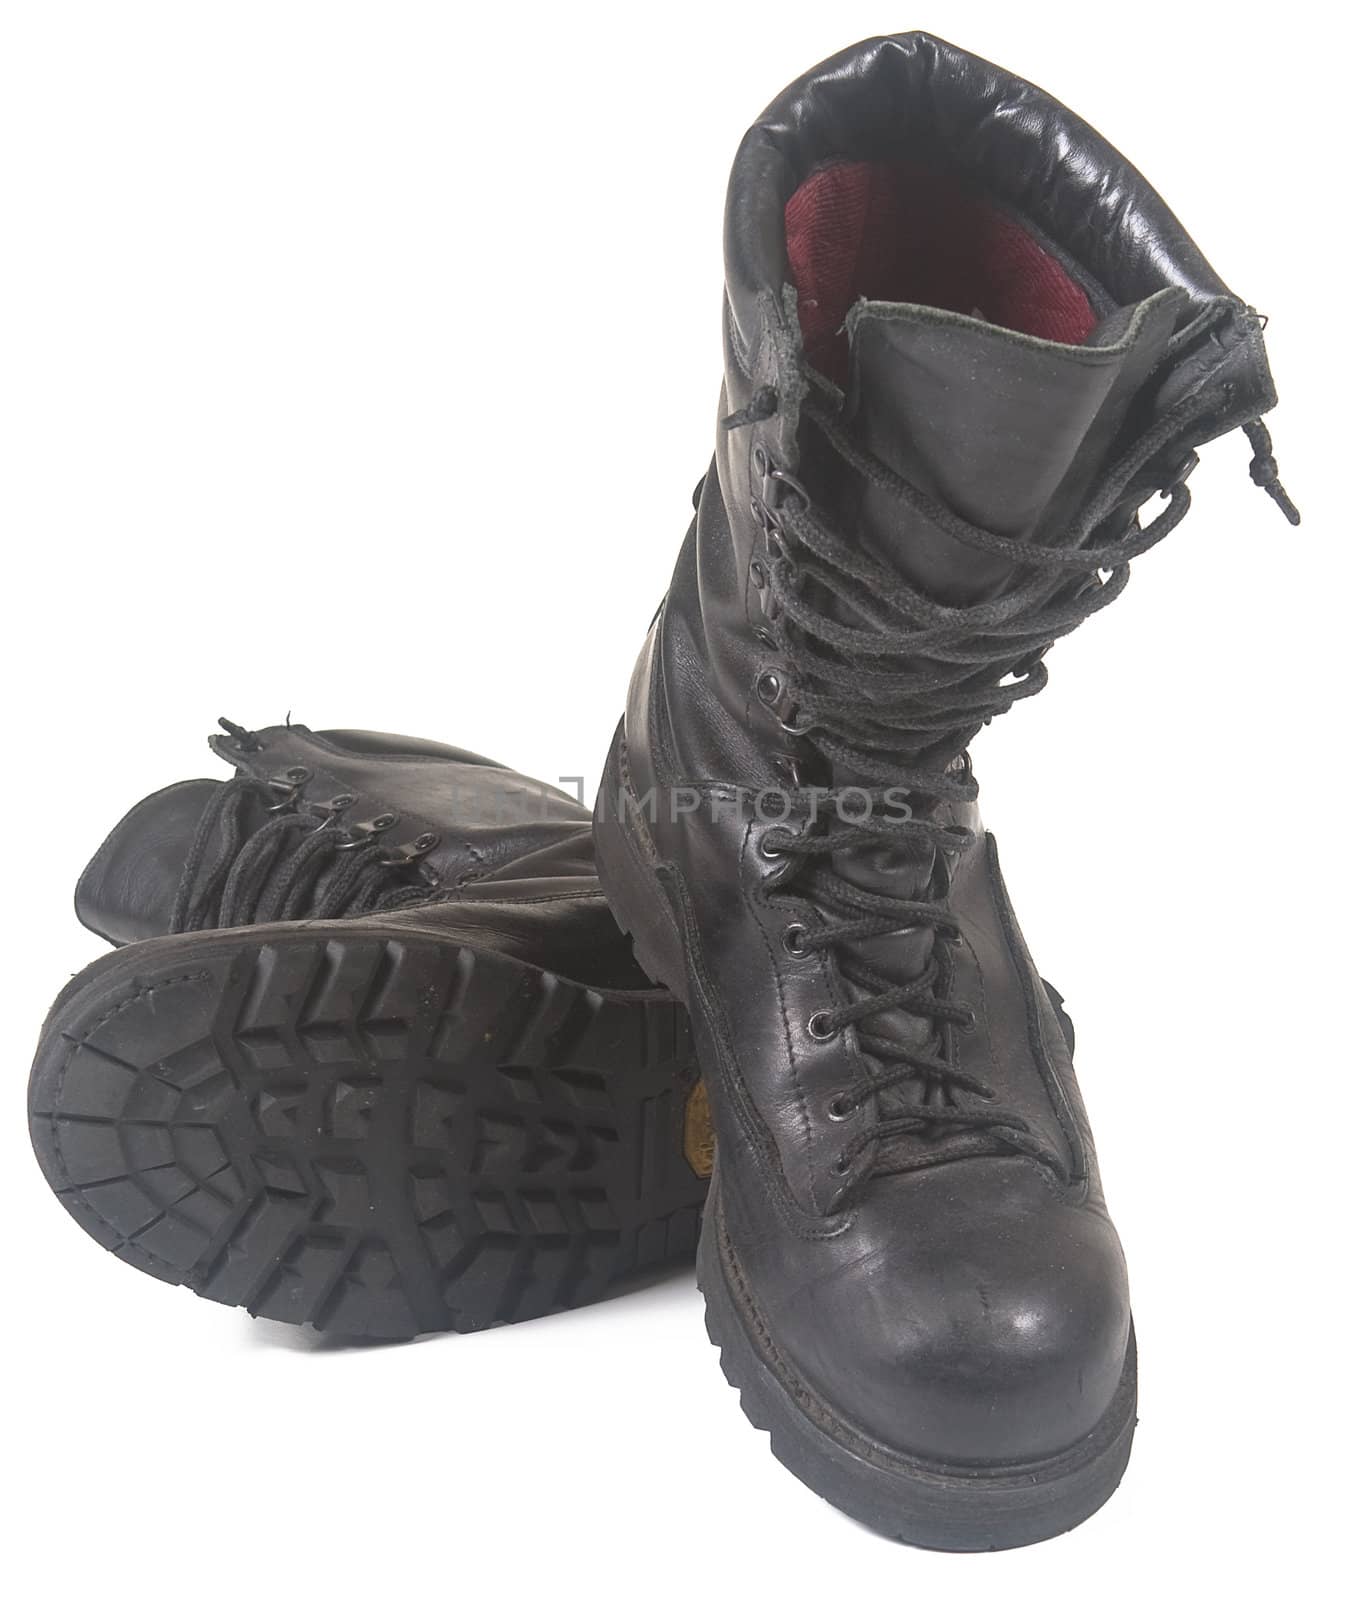 black military leather boots on white background